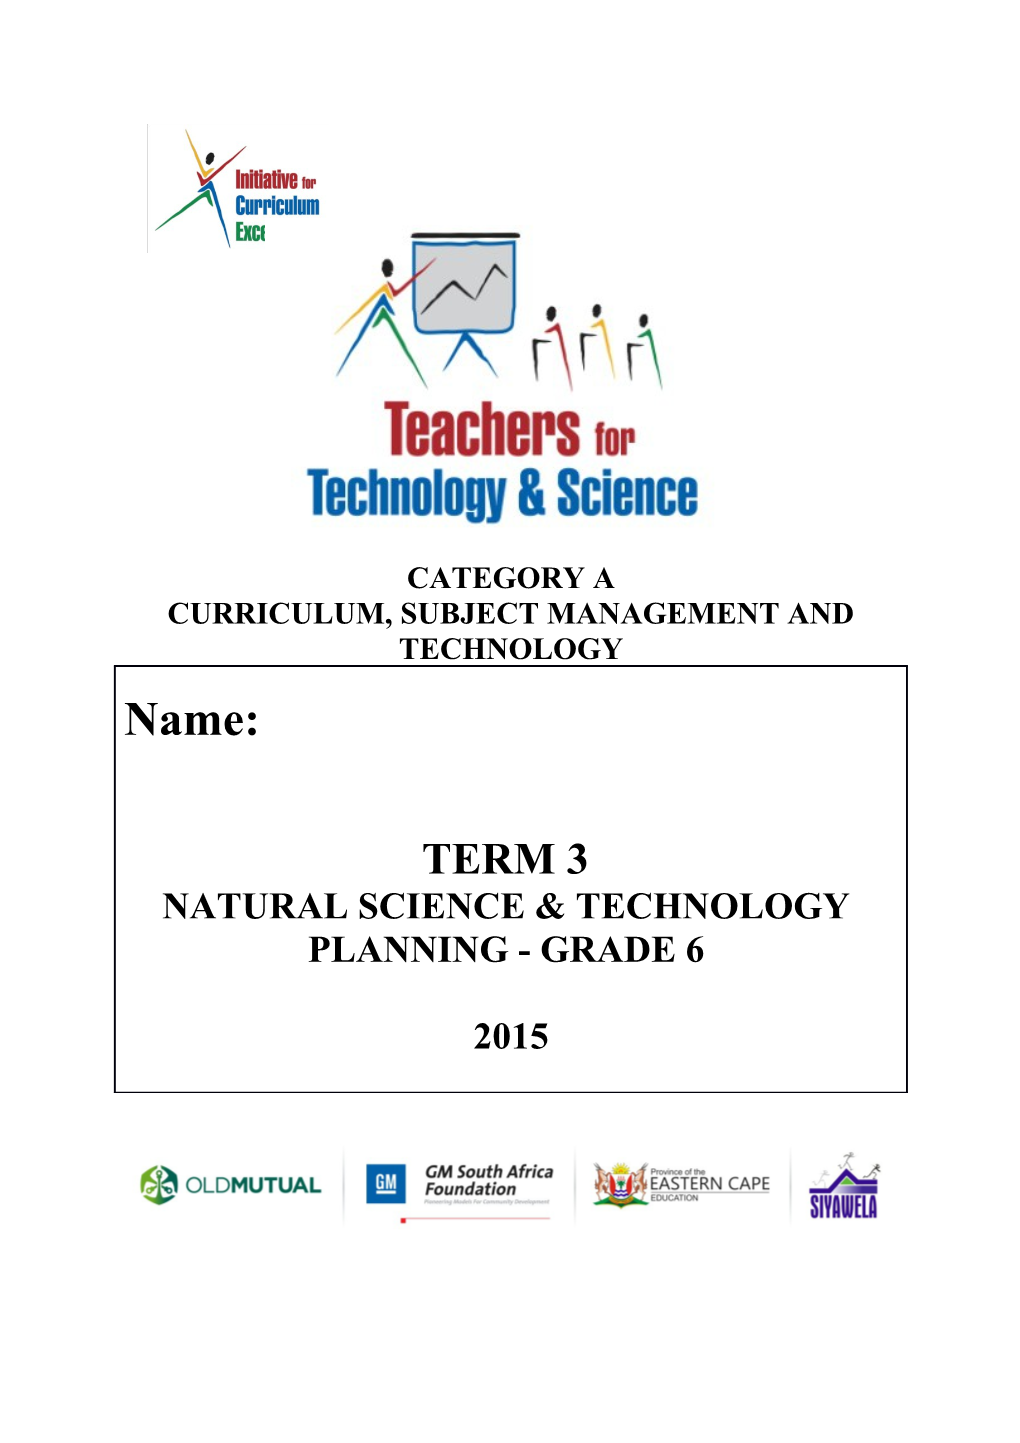 Curriculum, Subject Management and Technology